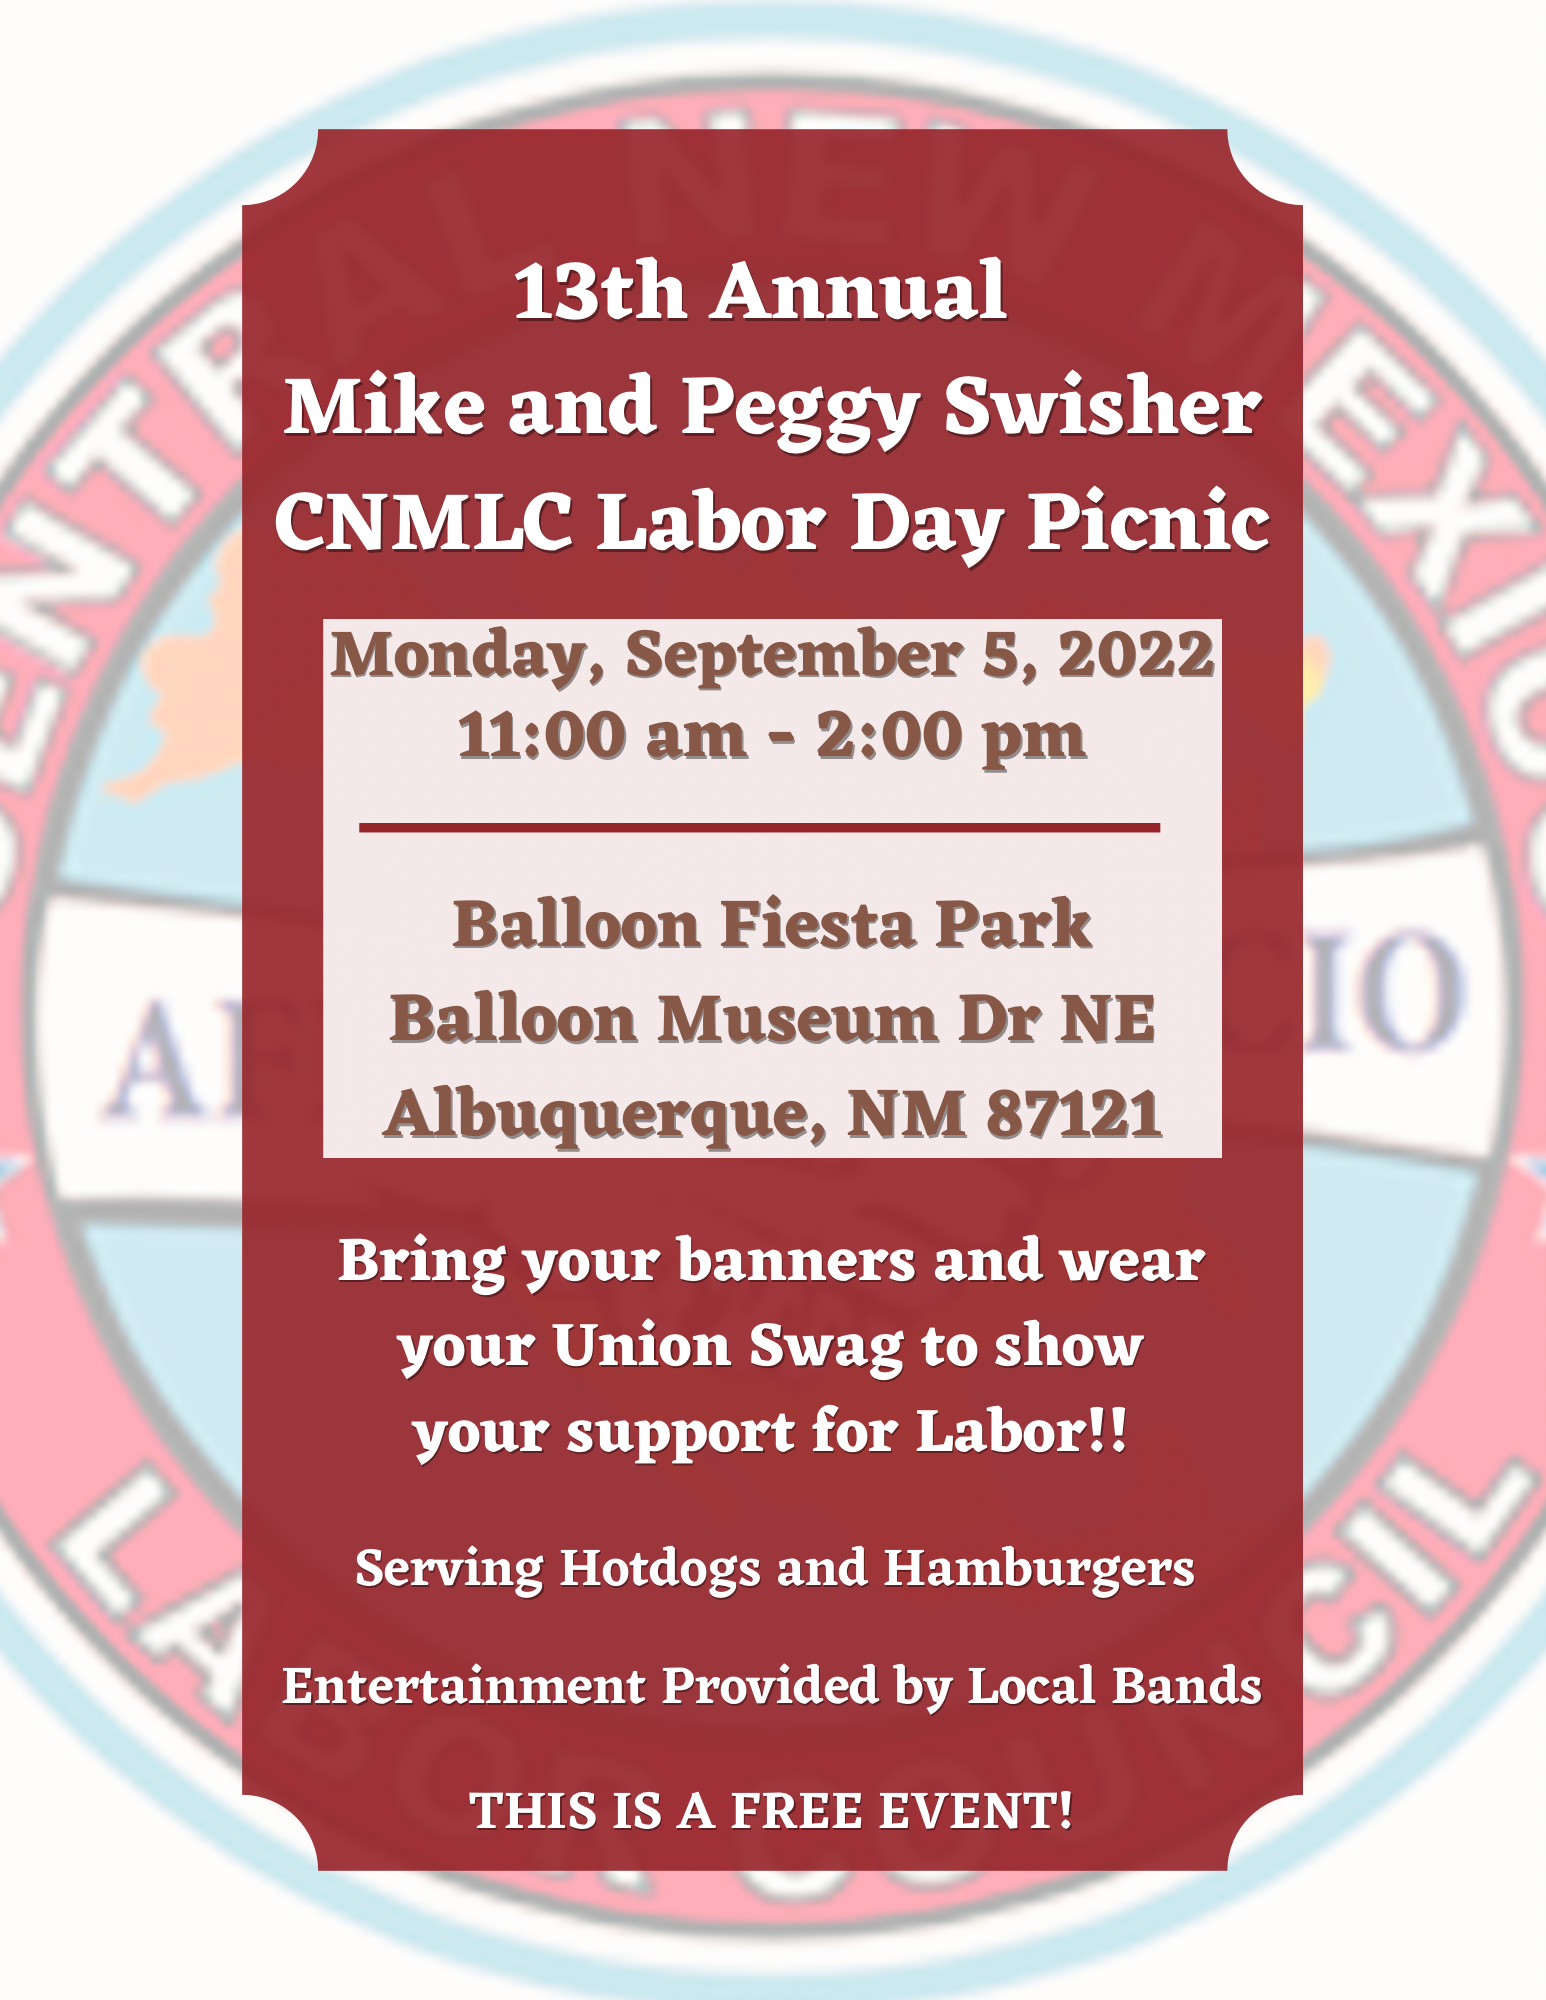 Red flyer with details for Labor Day Picnic